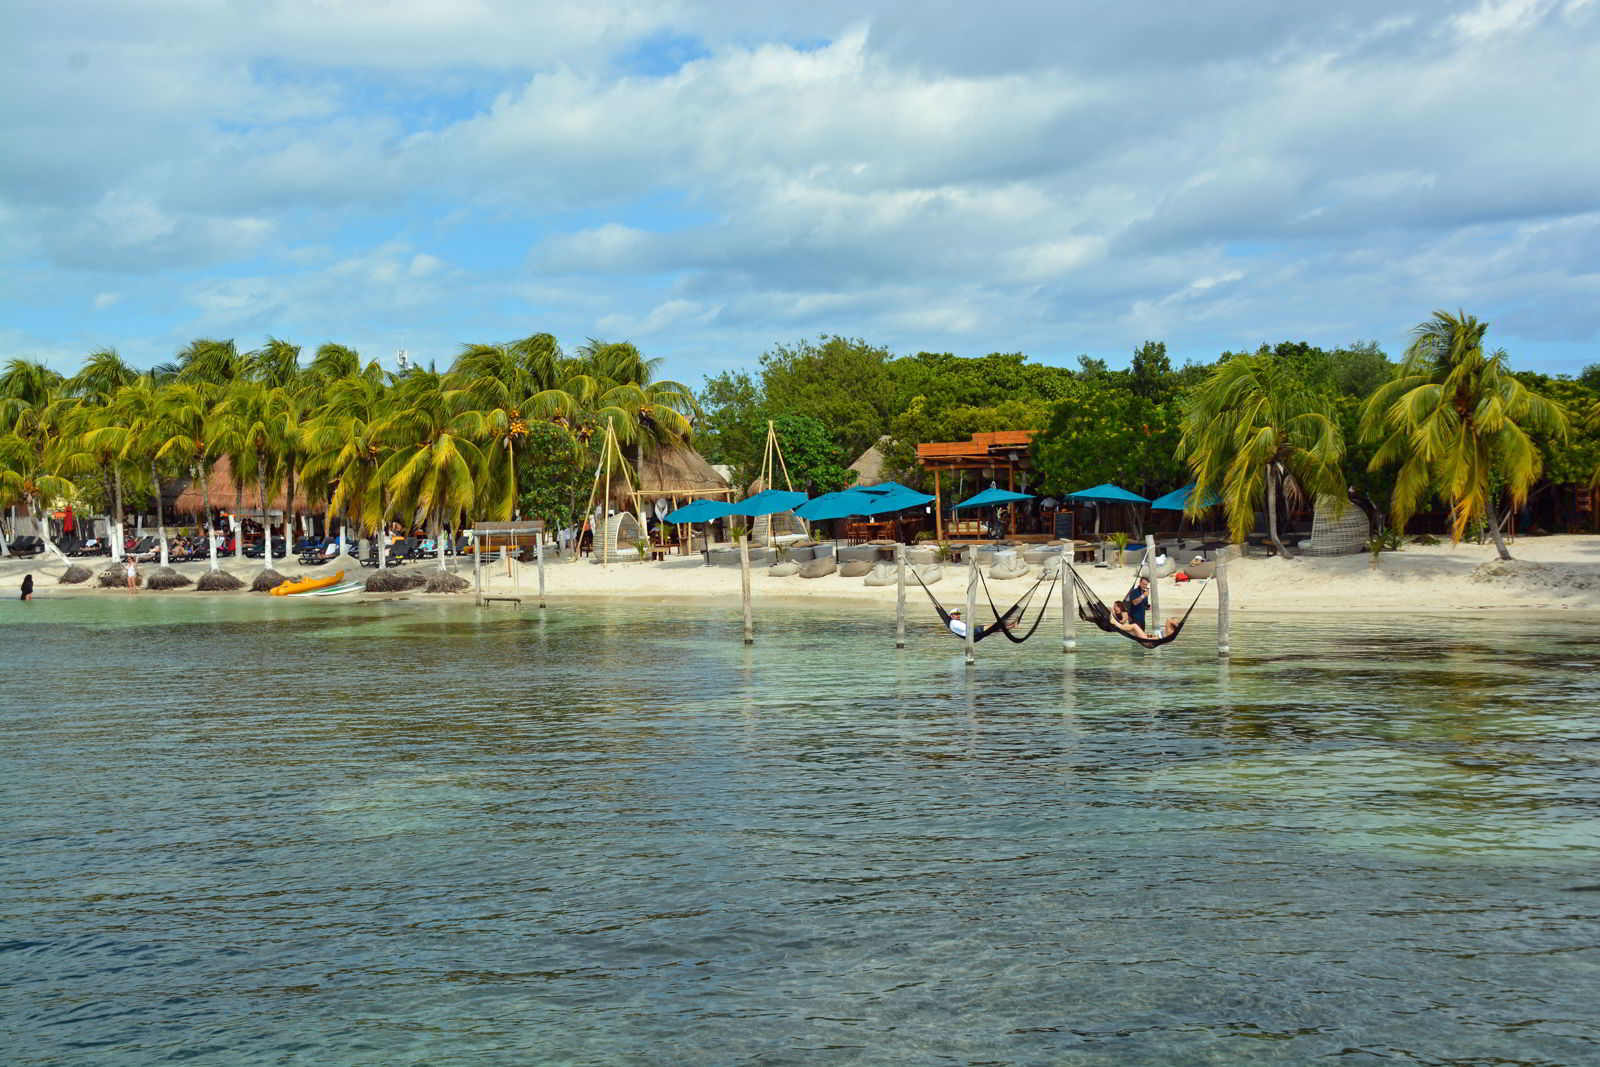 An image of a beach on Isla Mujeres